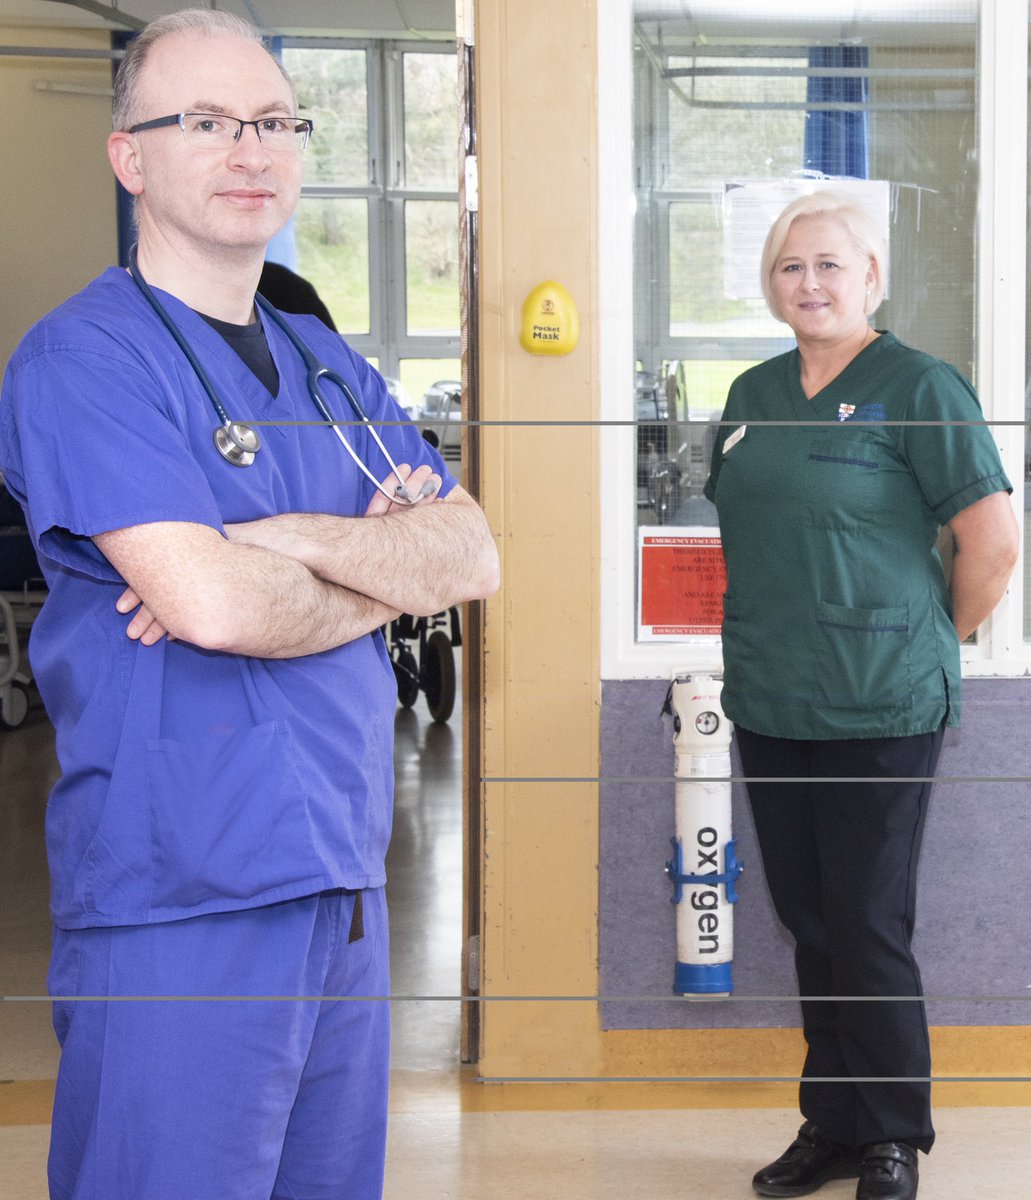 Last week @SPKennelly & ANP Claire Noonan set up a virtual clinic for Nursing Homes in the area of TUH.The video & tele-conference facilities enables them to review residents with Nursing Home staff & reduce any unnecessary transfers to Hospital @ainemlynch #TUHWorkingTogether